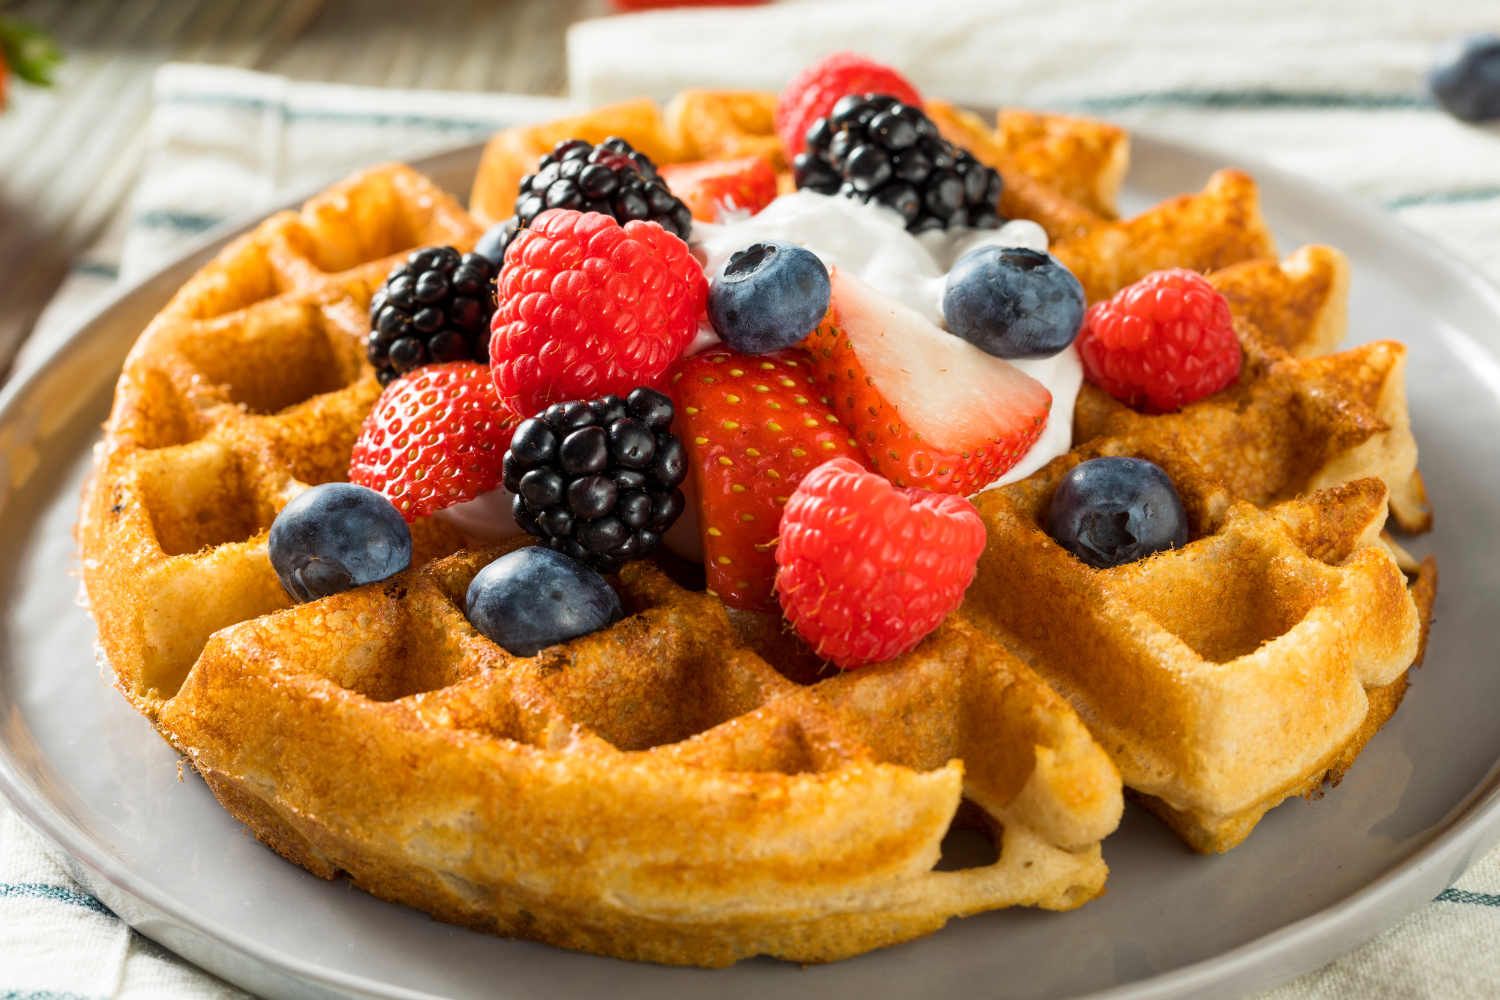 a waffle with fresh strawberries, blackberries and blueberries on top.